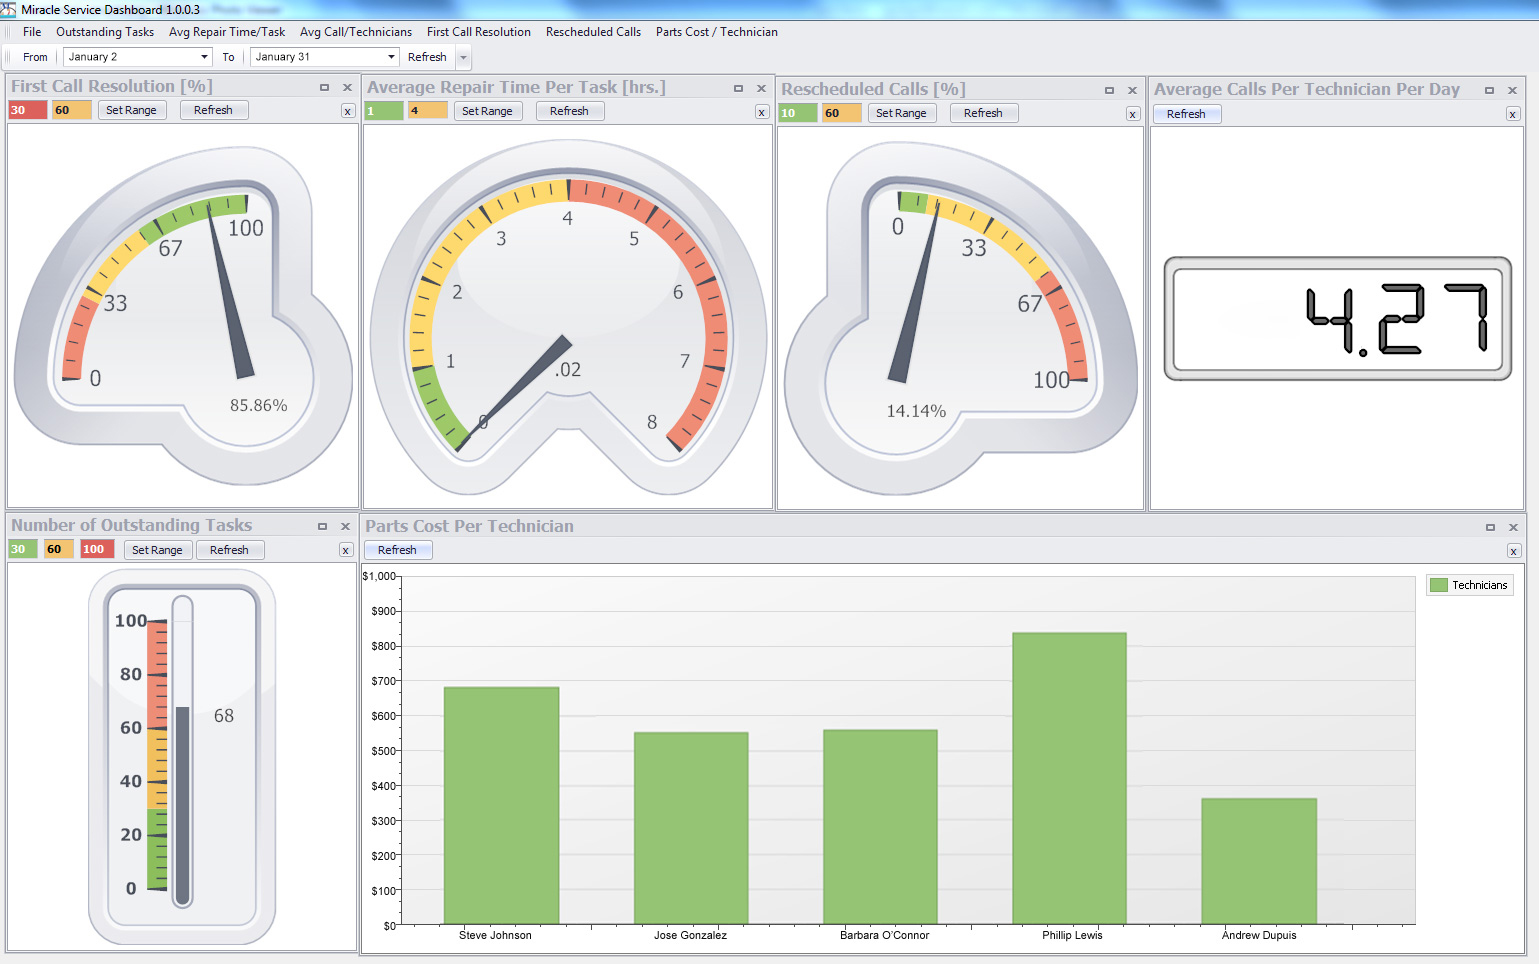 Management Reporting Dashboard View